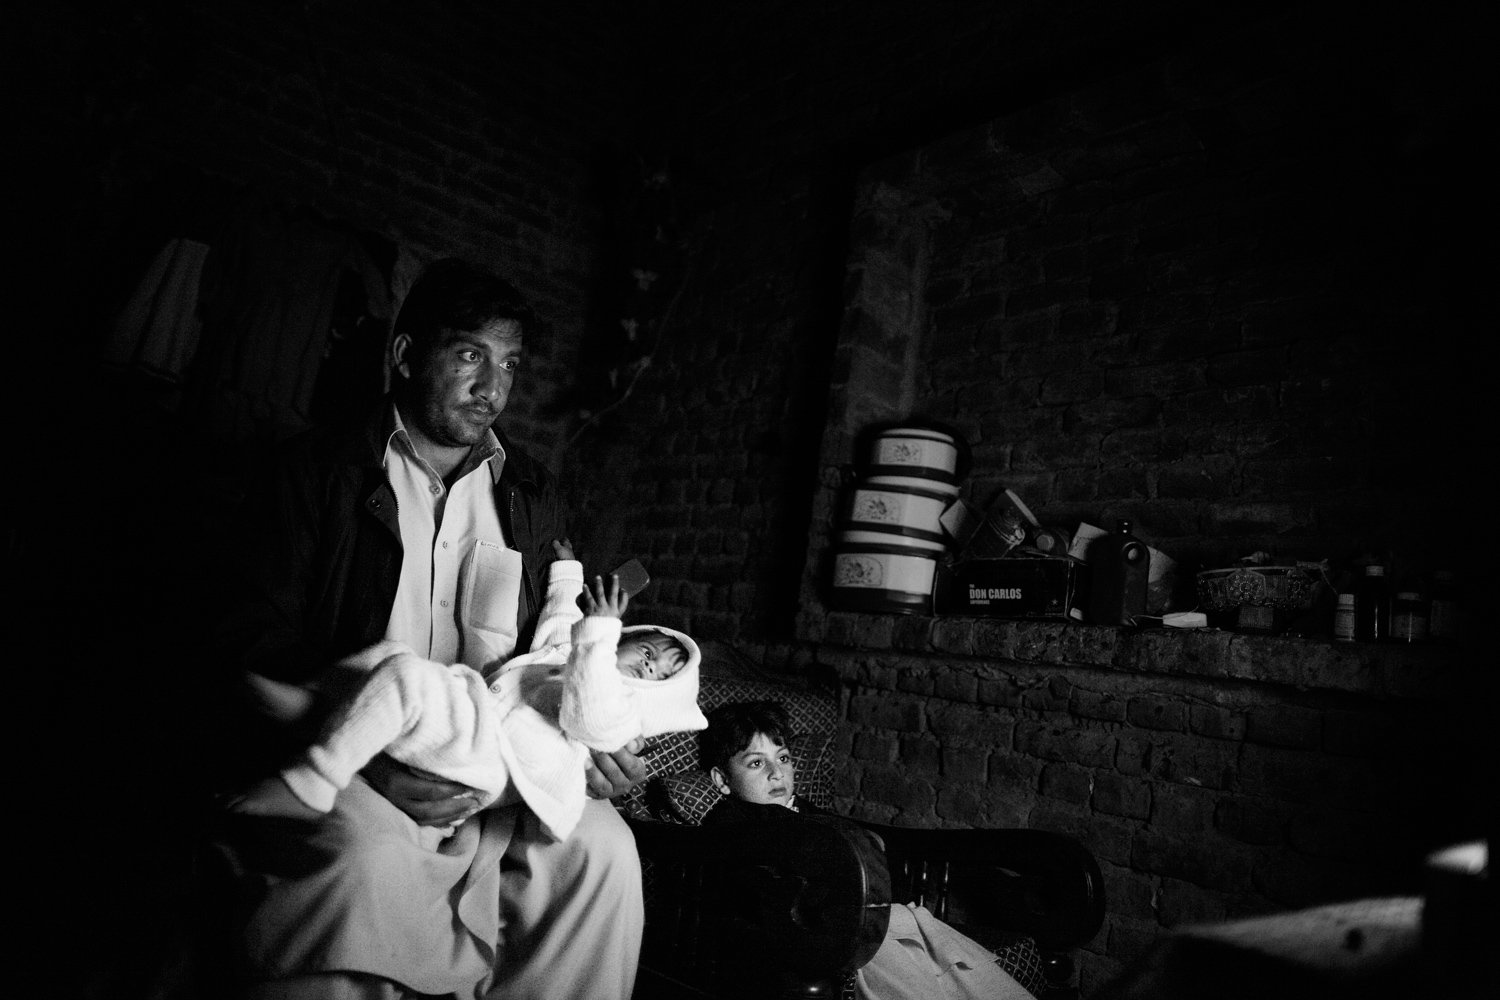 Pakistan, Swat Valley, Alligrama, March 2011. A Lashkar member, Ameer Zaib, watching TV in his bedroom with his children and trying to soothe his baby girl Gull Sangay to sleep. His young son Zaraq Khan is also with them.